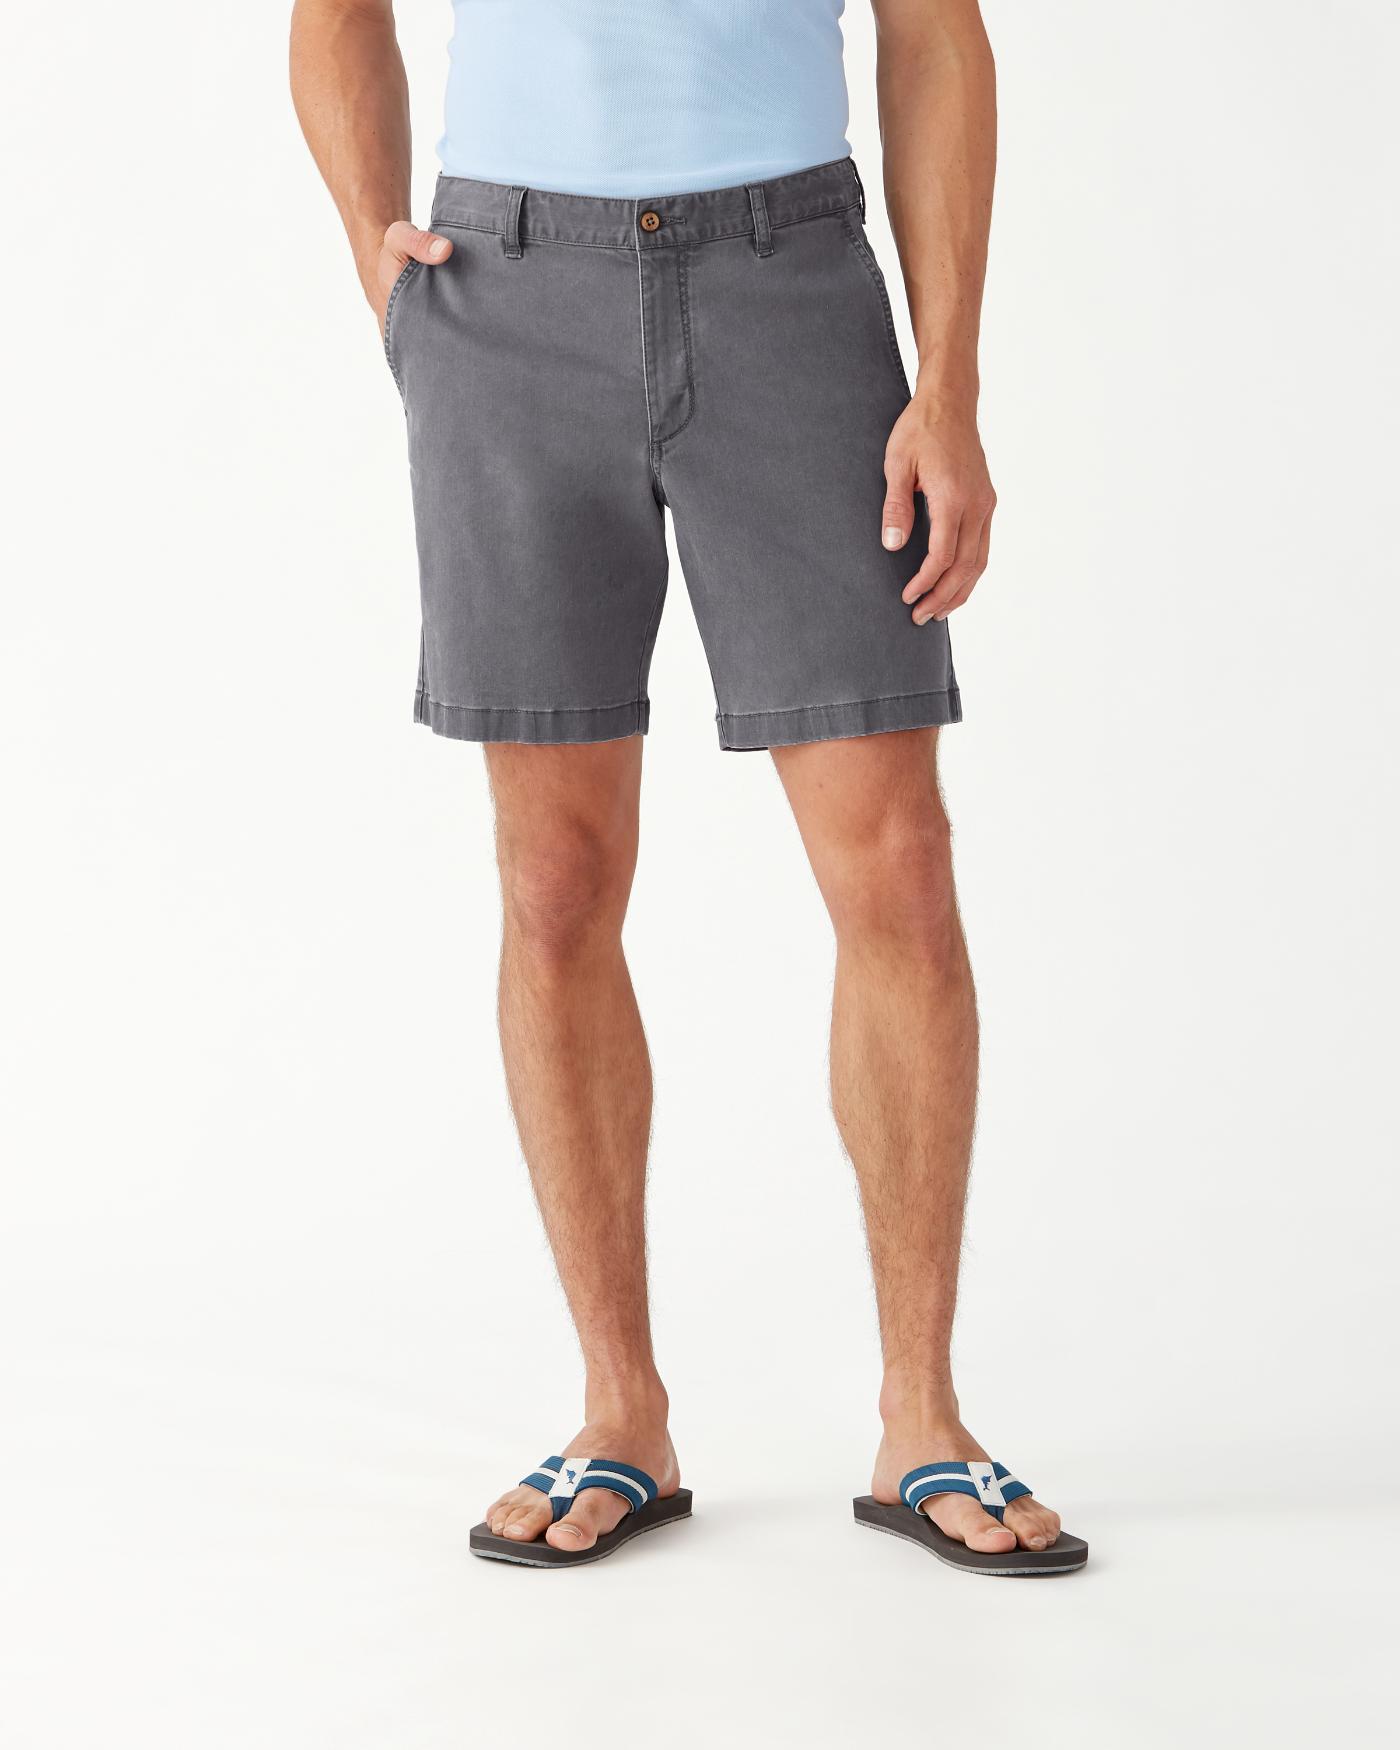 Tommy Bahama Cotton Boracay 8-inch Chino Shorts in Gray for Men - Lyst